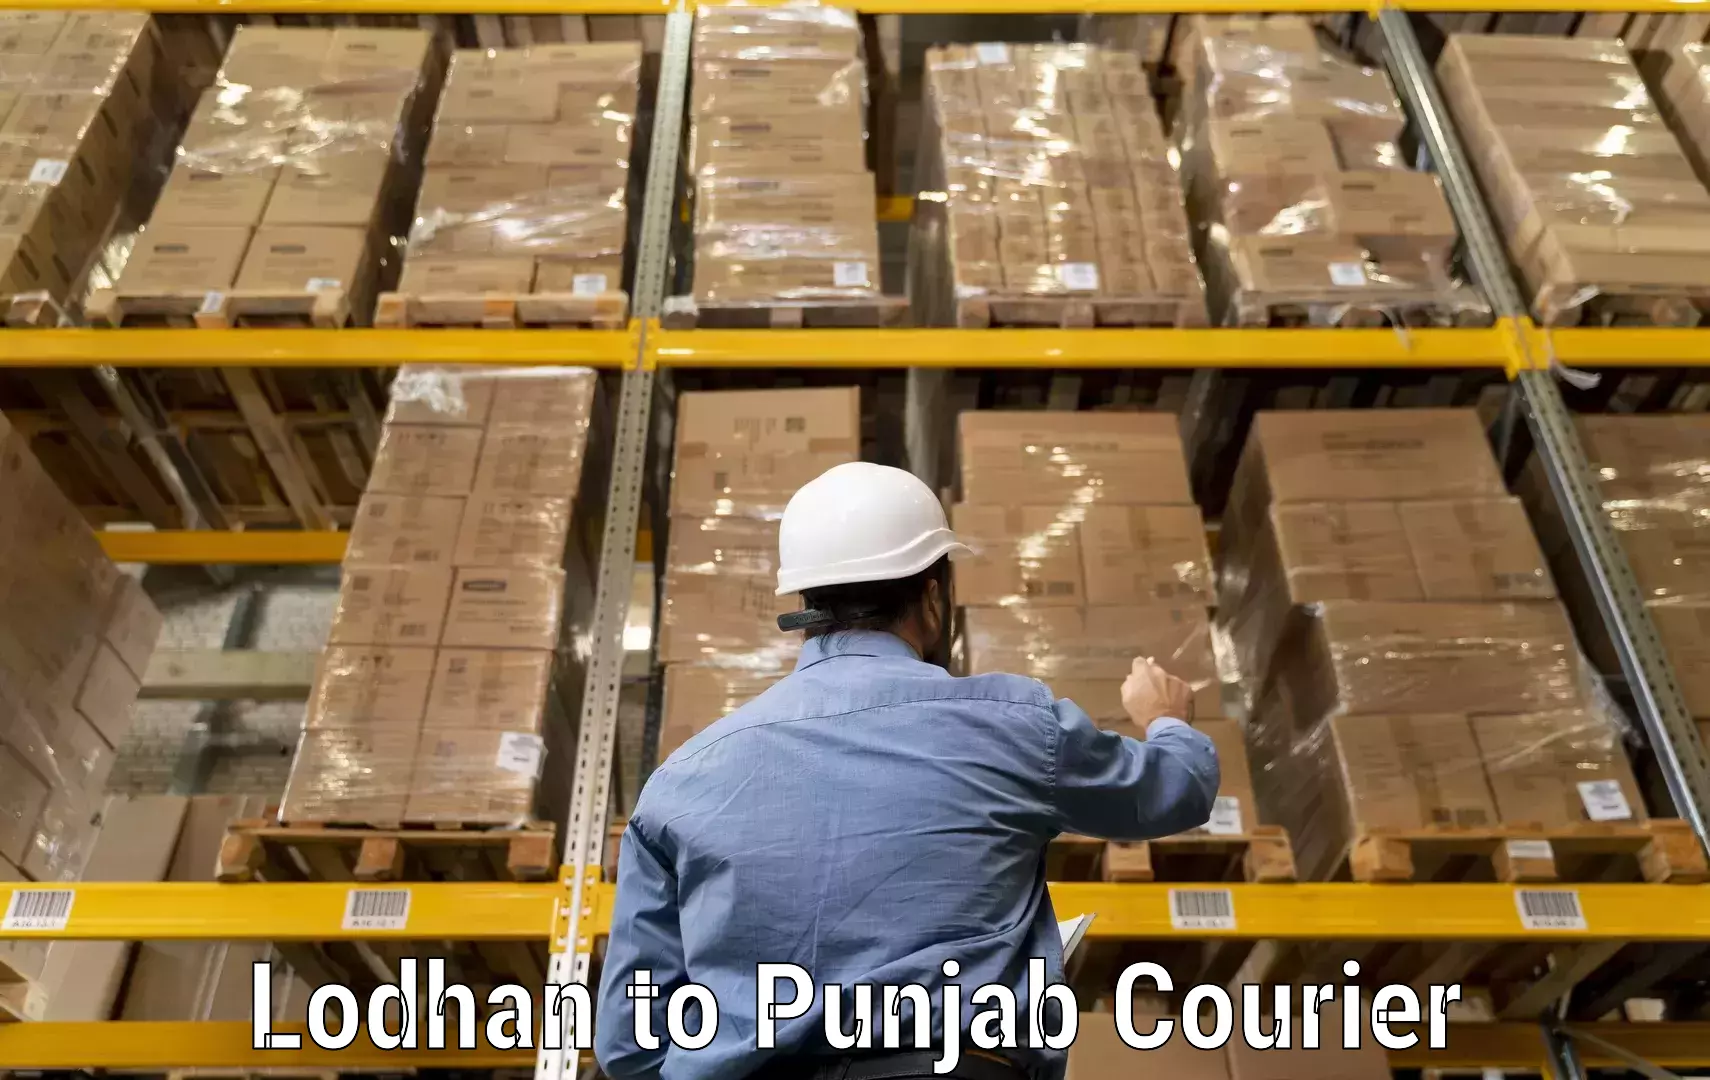 Optimized shipping services Lodhan to Punjab